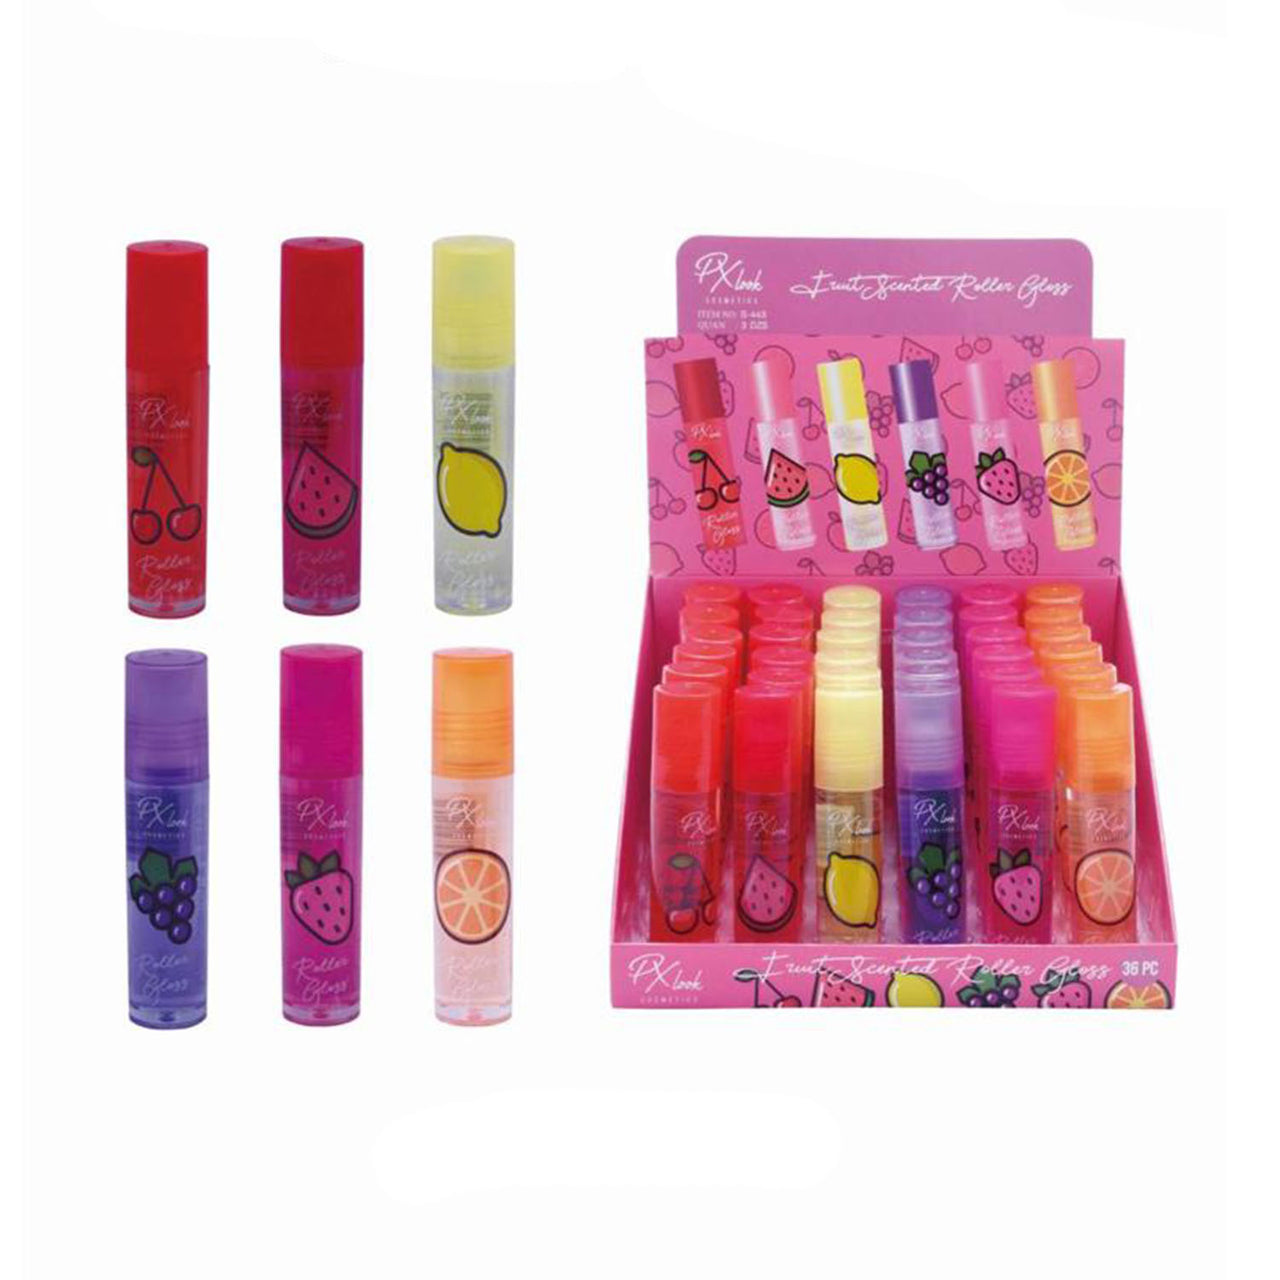 PX Look S443 Fruit Scented Roller Gloss Cosmetic Wholesale-Cosmeticholic